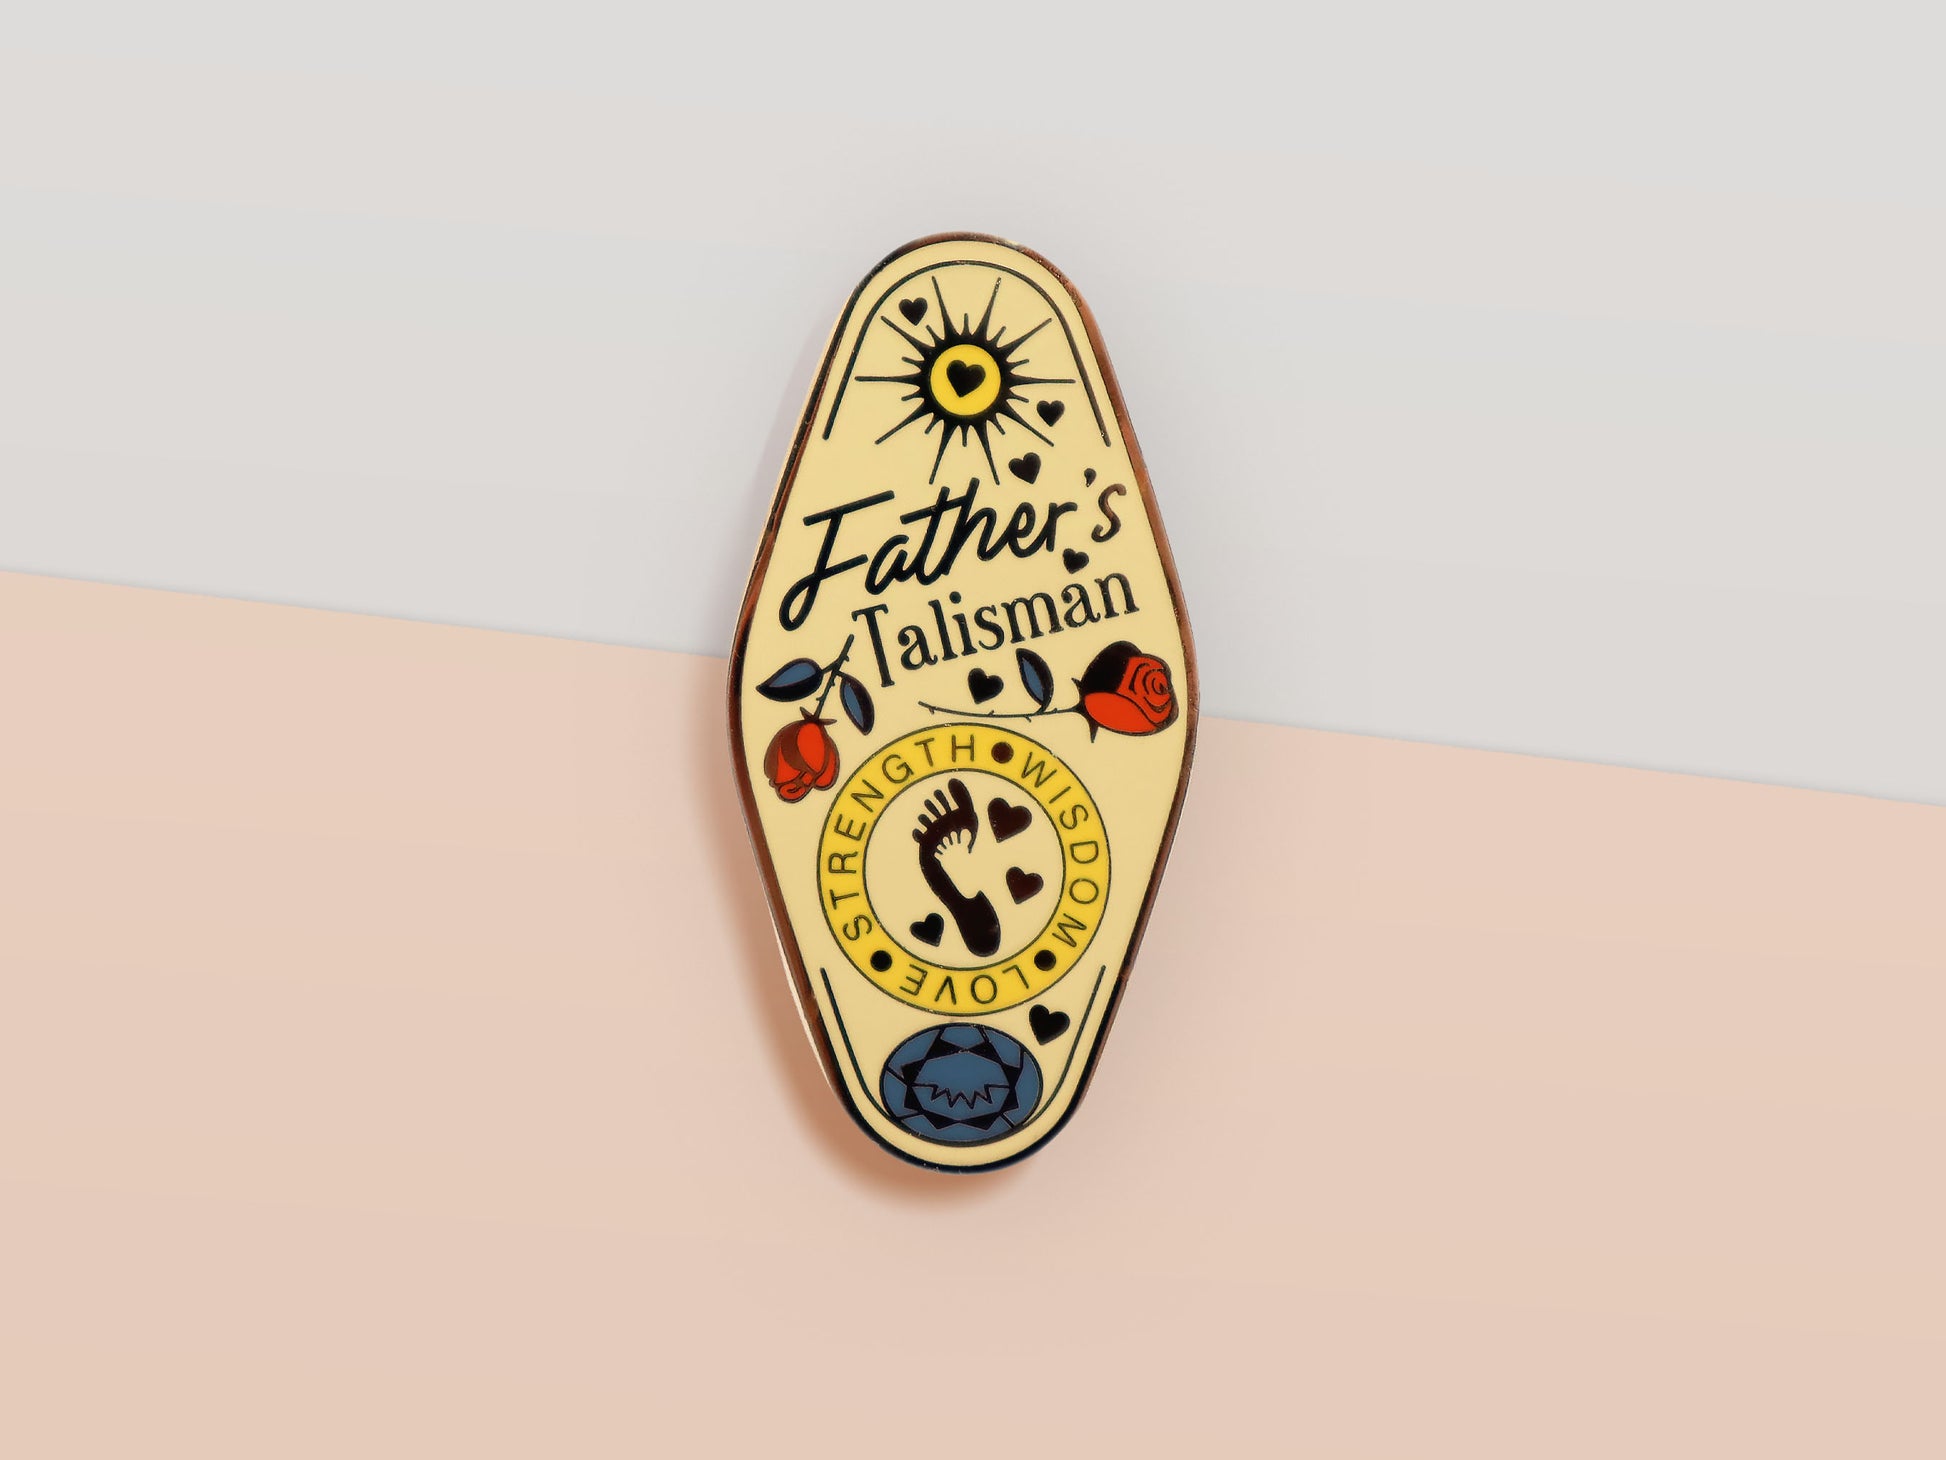 Gold Enamel Talisman Pin with yellow design and the words Father's Talisman, Strength Wisdom Love. The pins design includes a fathers and child's footprint, sunshine, hearts, as well as flowers and crystals.